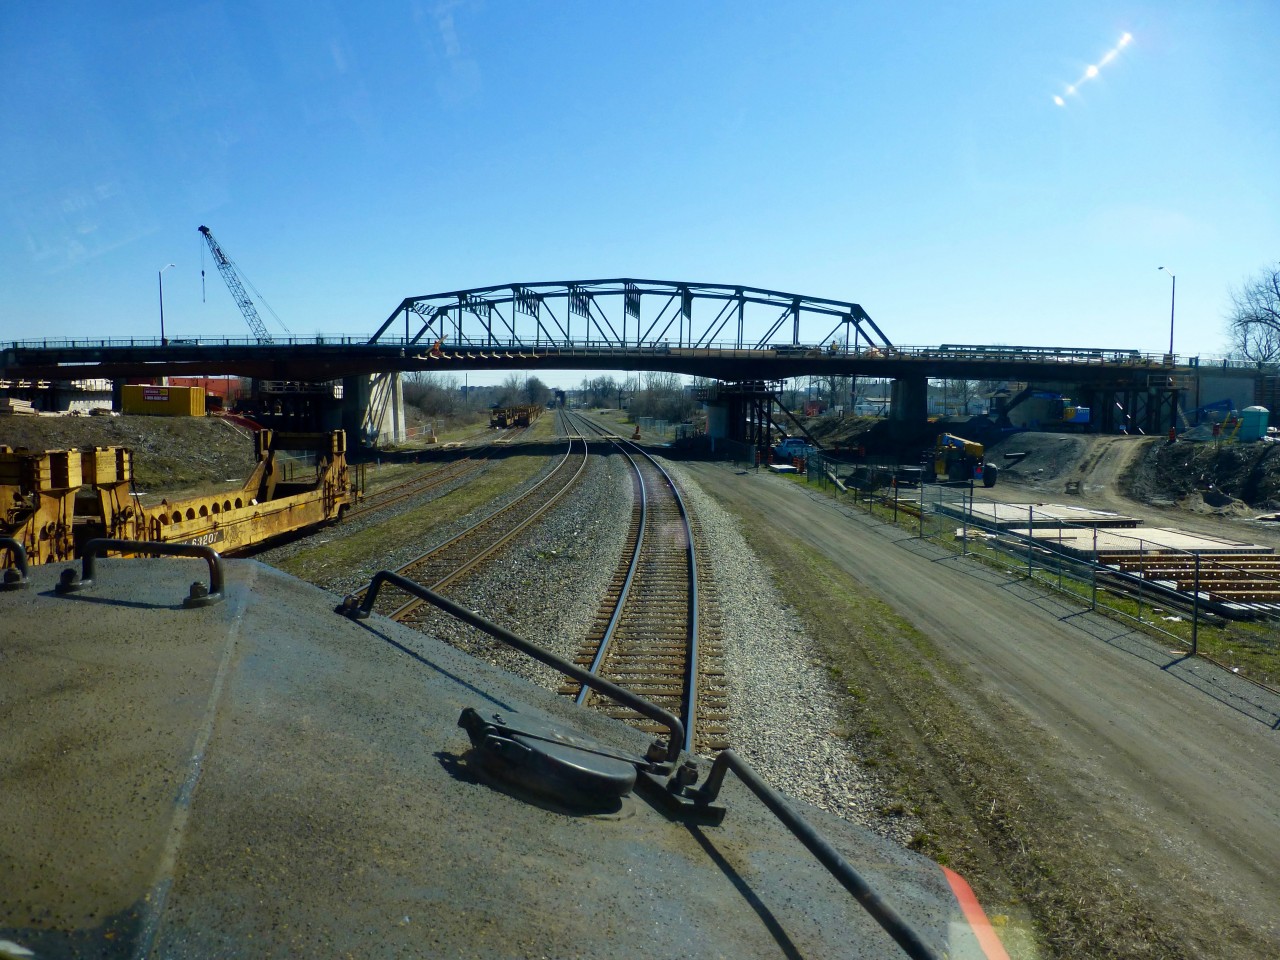 Work continues on the Central Avenue bridge replacement. A busy spot these days as construction of the bridge deck seems complete. CN 532 a Mac Yrd to Buffalo trains gets ready to depart for Buffalo after seeting on NS traffic in Fort Erie. Things have changed here in 35 years.